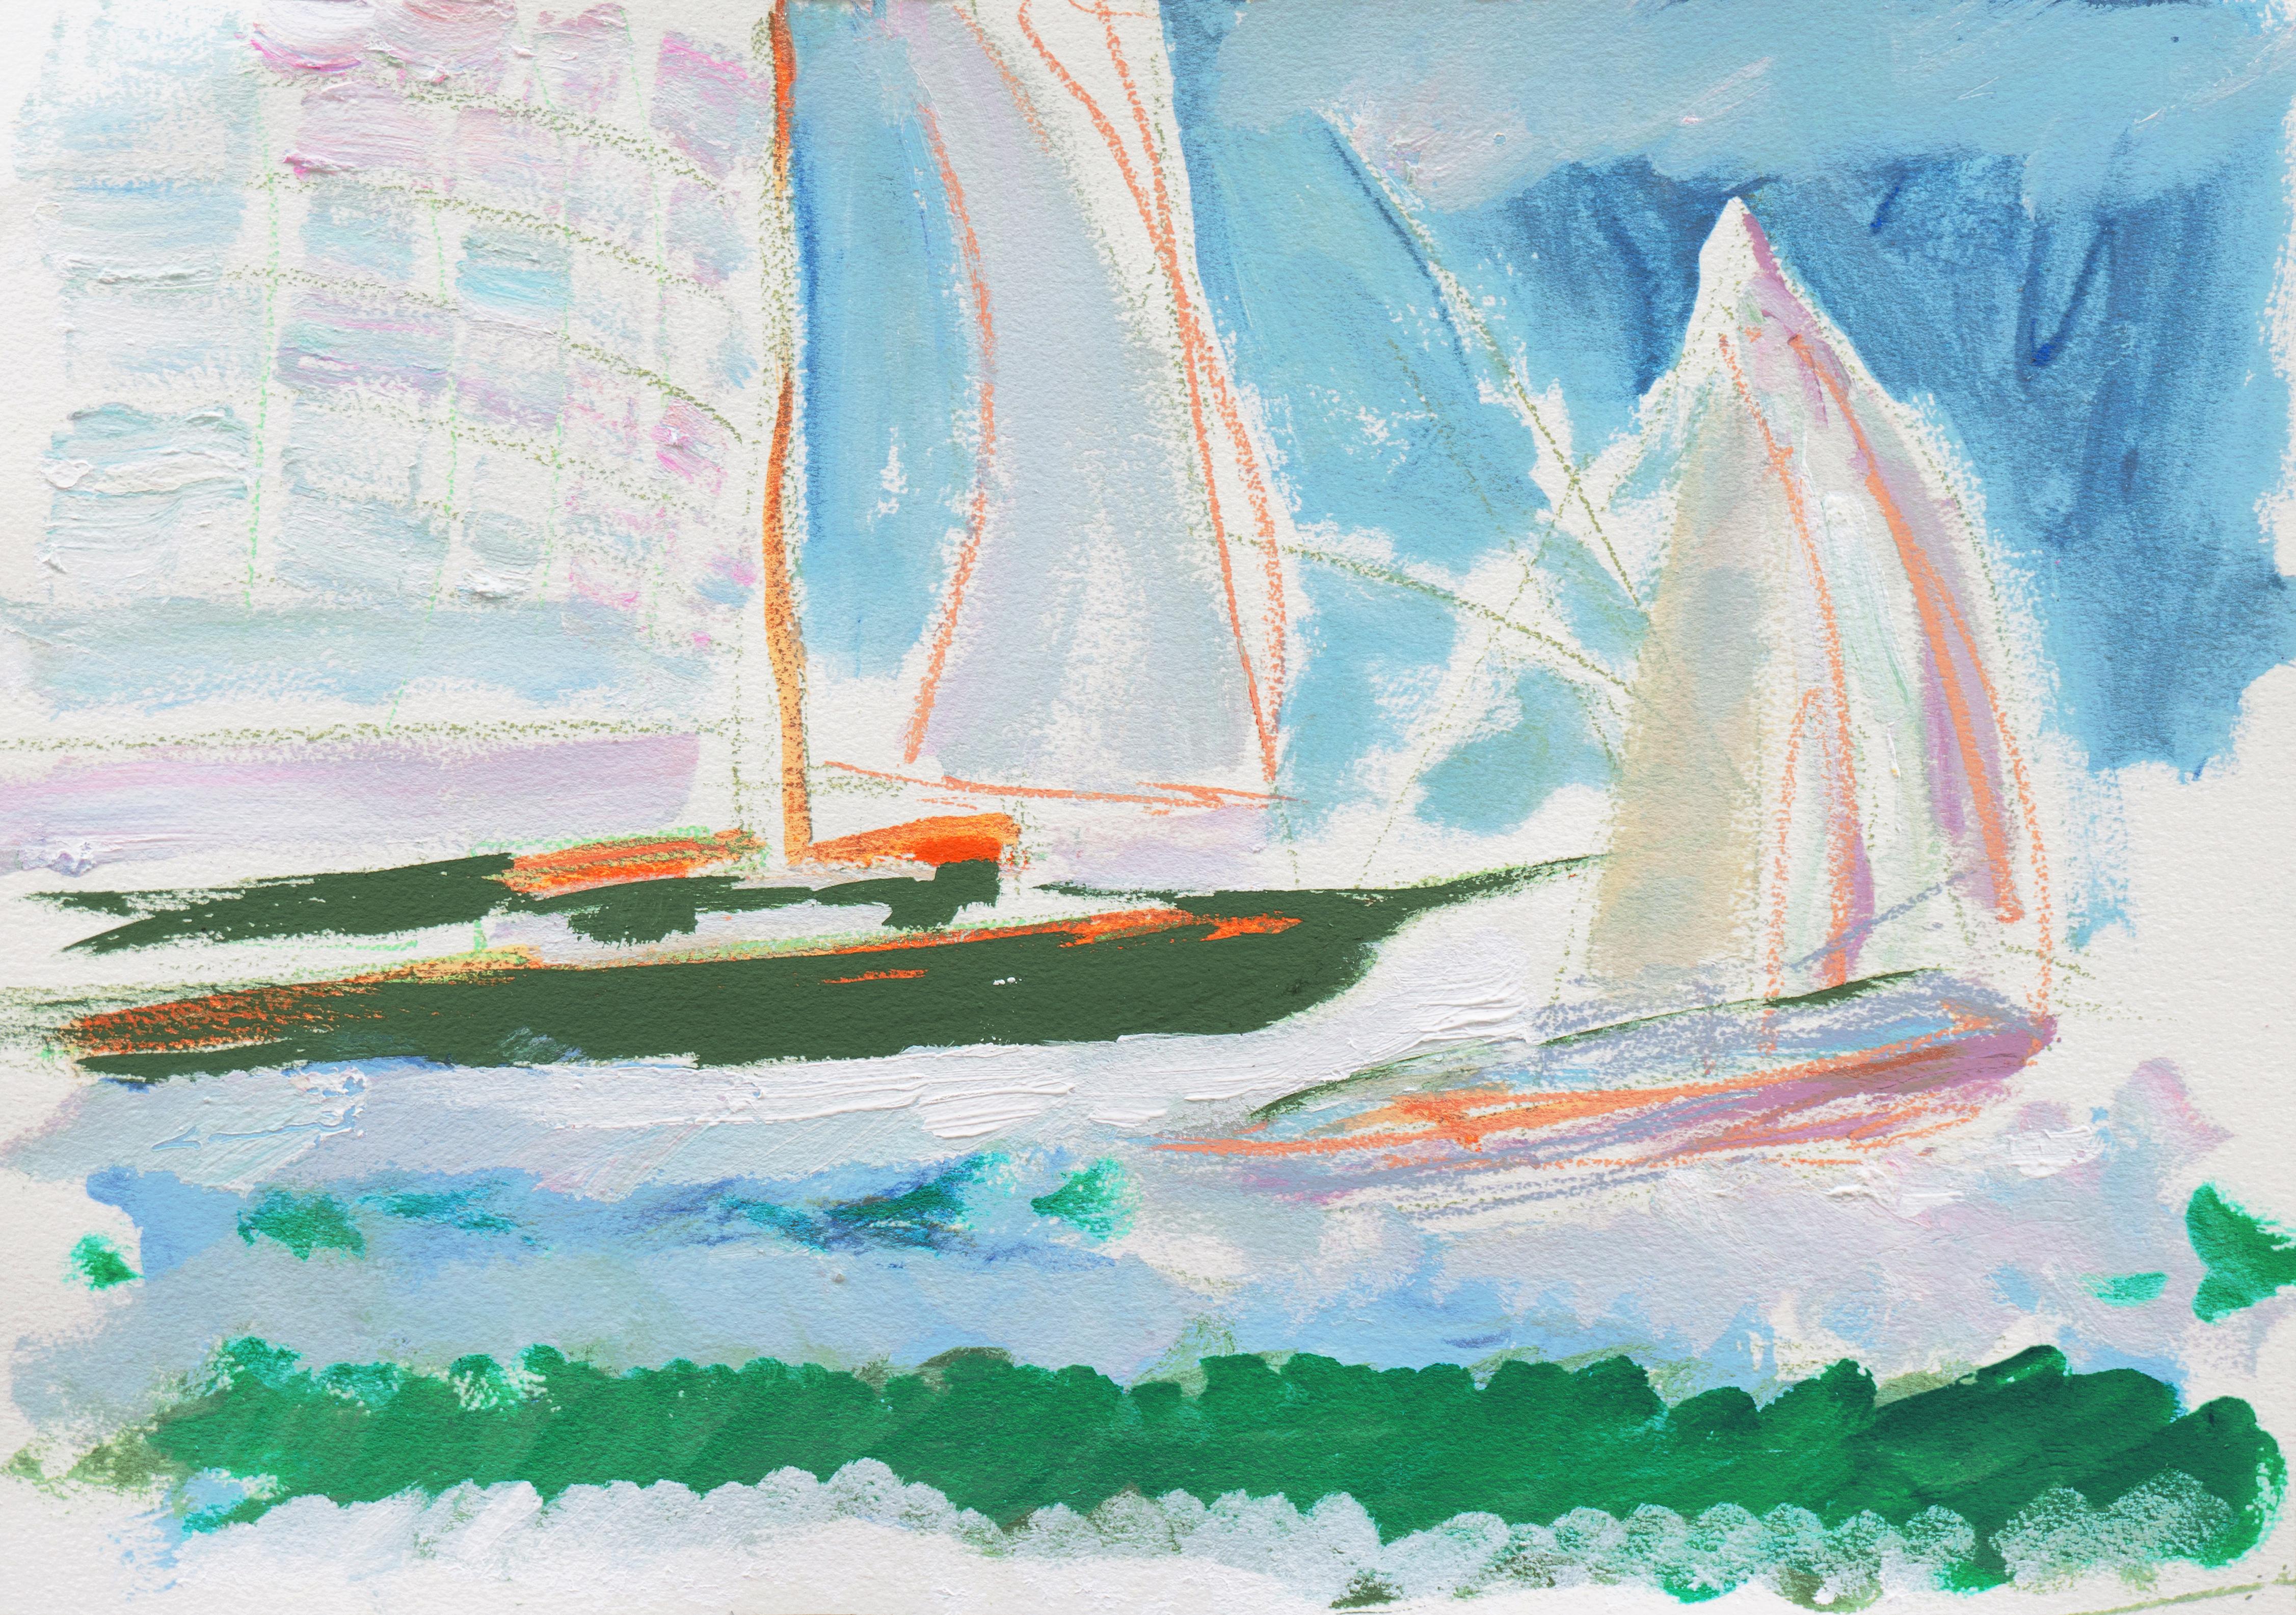 'Sailing Boats off Monterey', California Expressionist, Stanford, Carmel